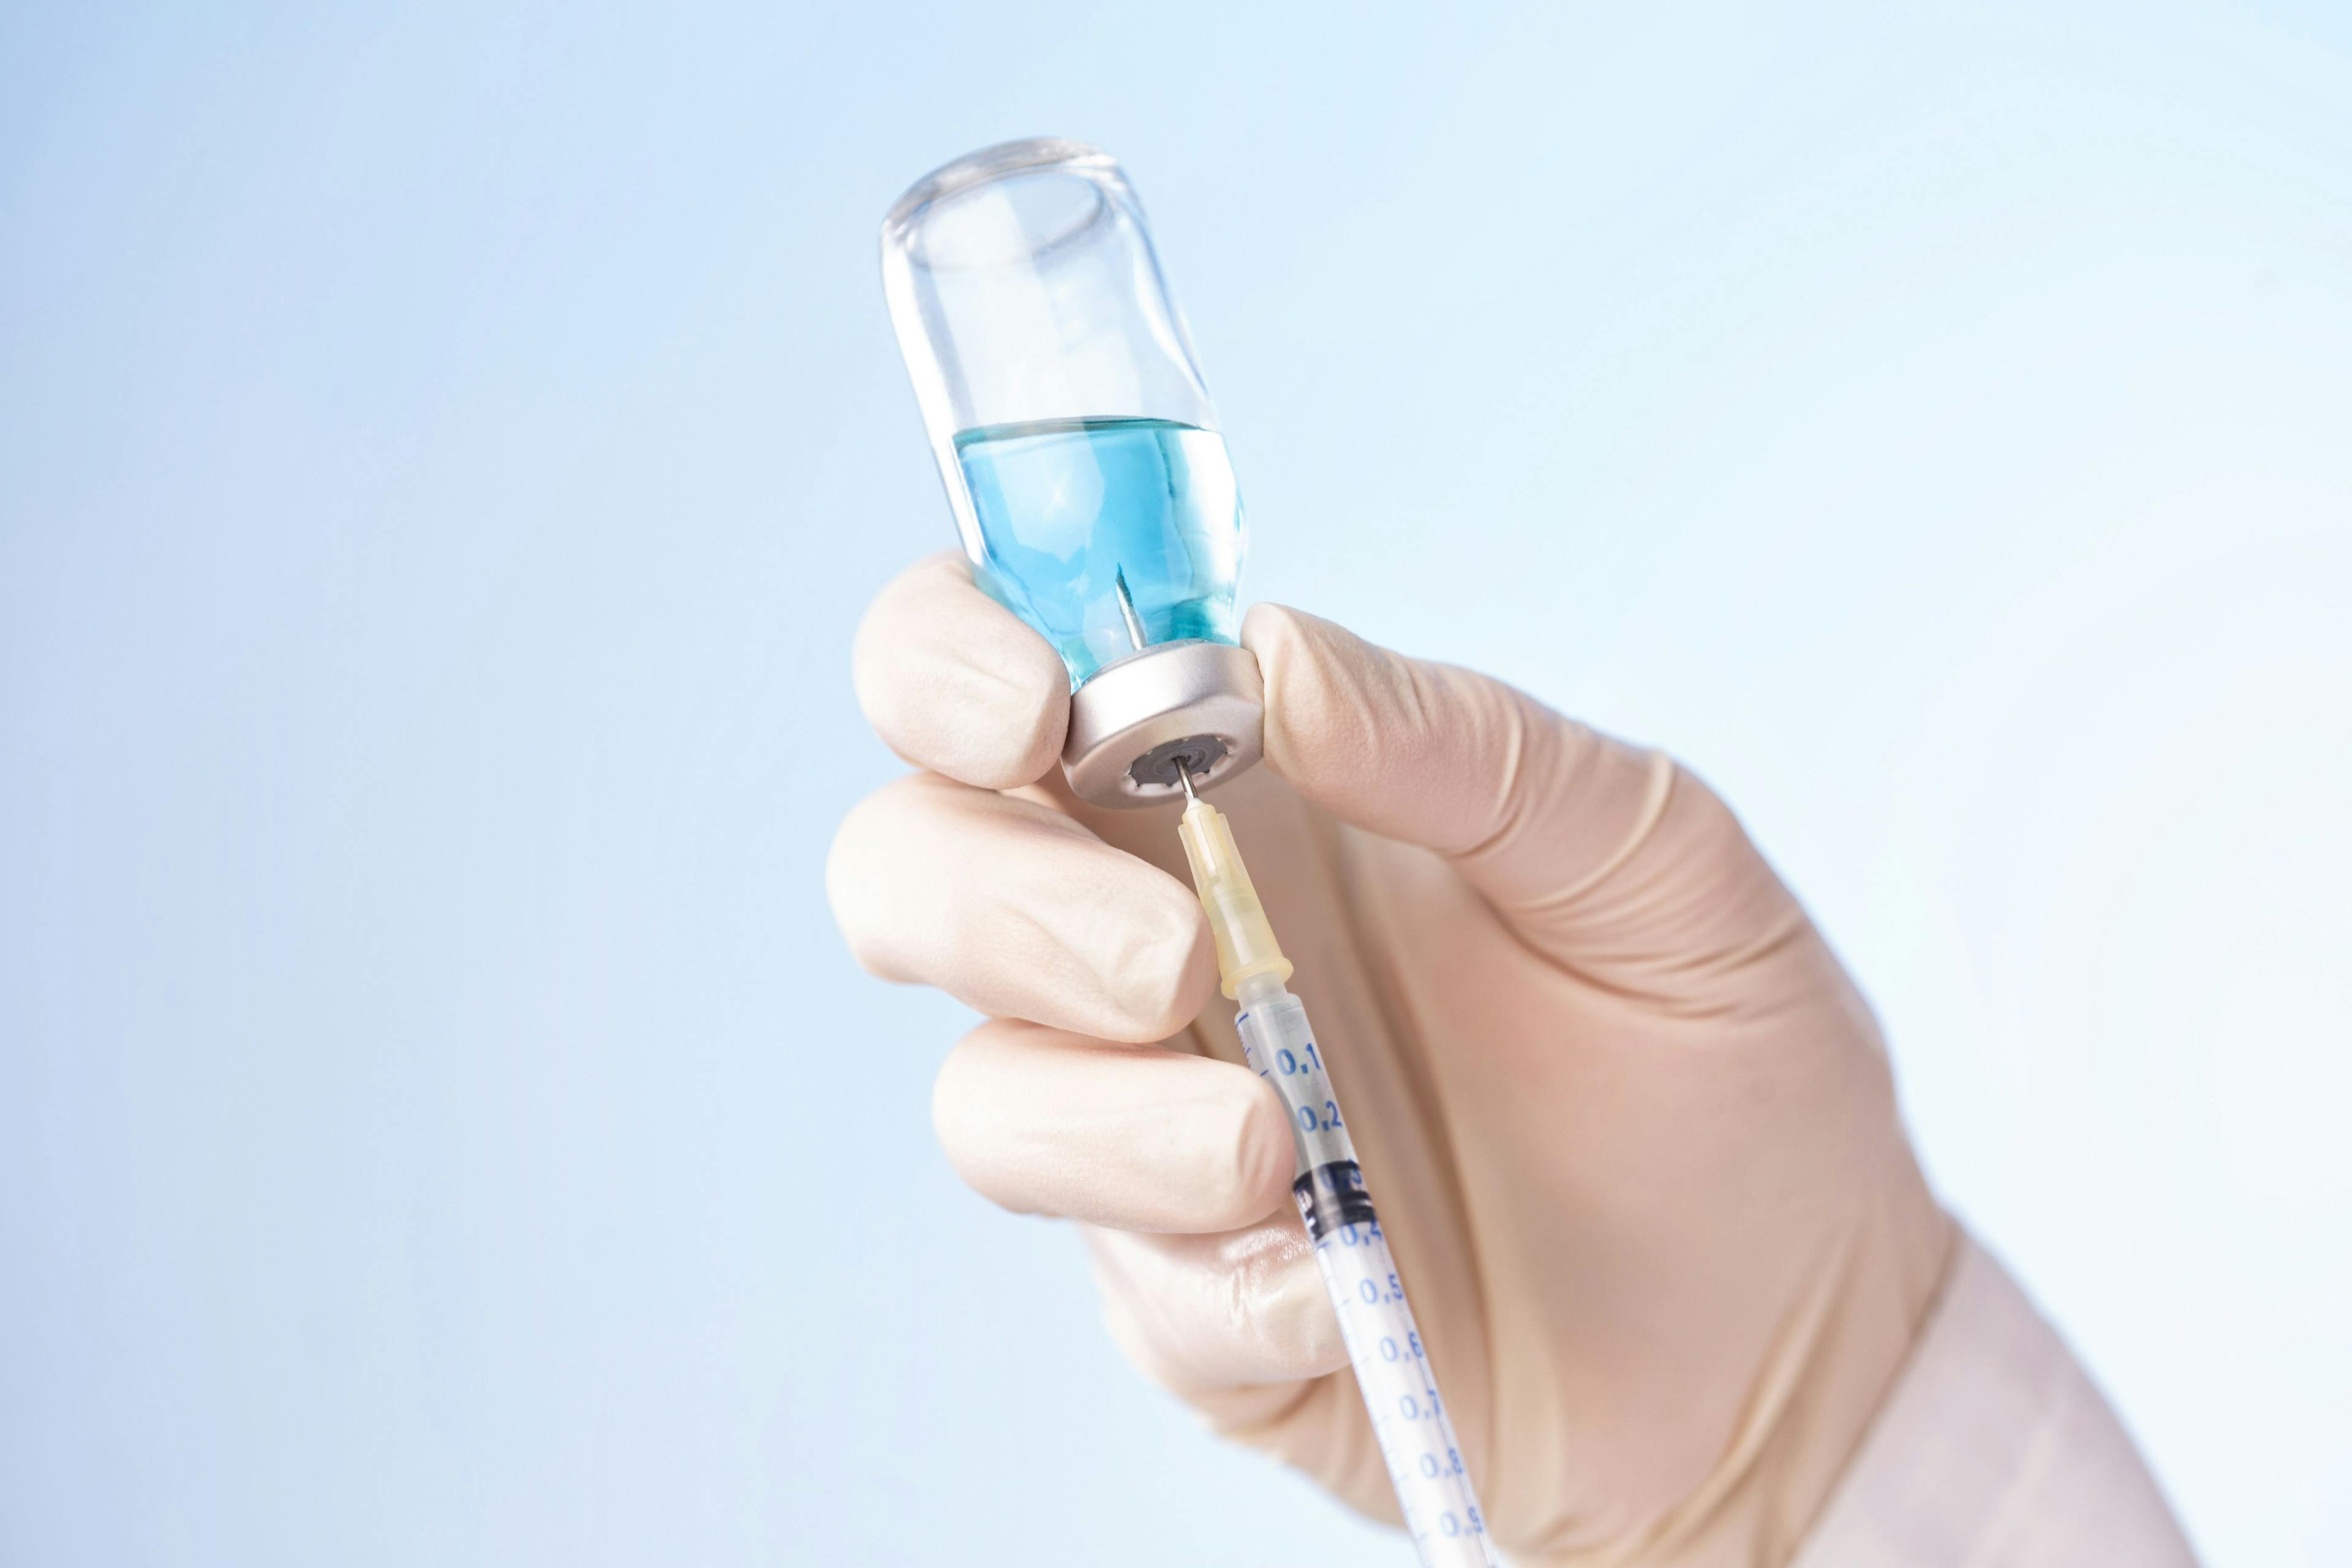 Ethical, Practical Considerations of Exemptions to Employer Vaccine Mandates for Anxiety